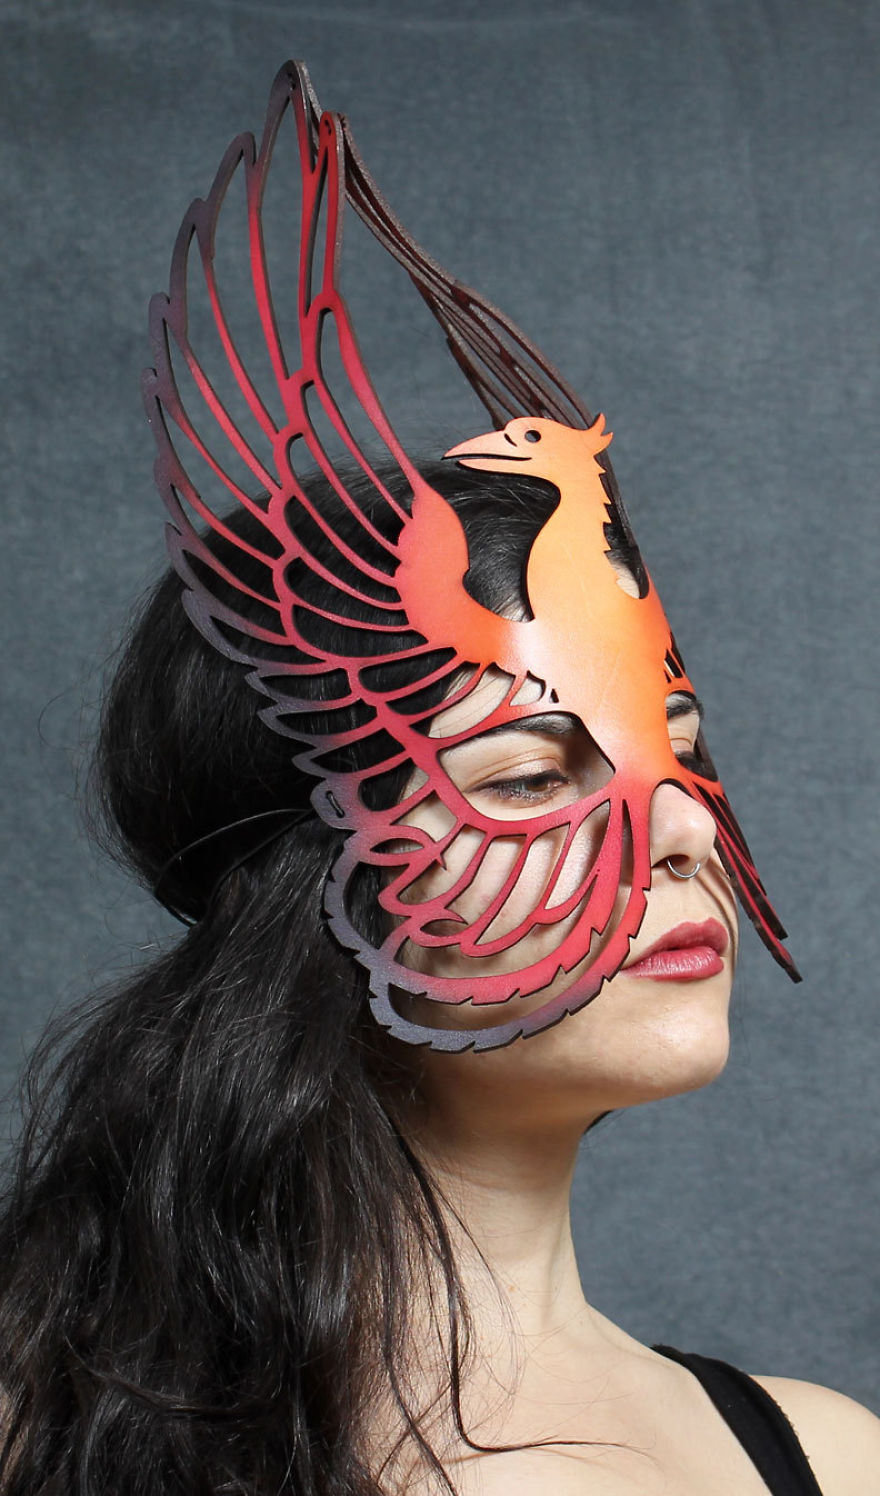 These 10 Handcrafted Masks Will Make You Invent Any Reason To Wear One